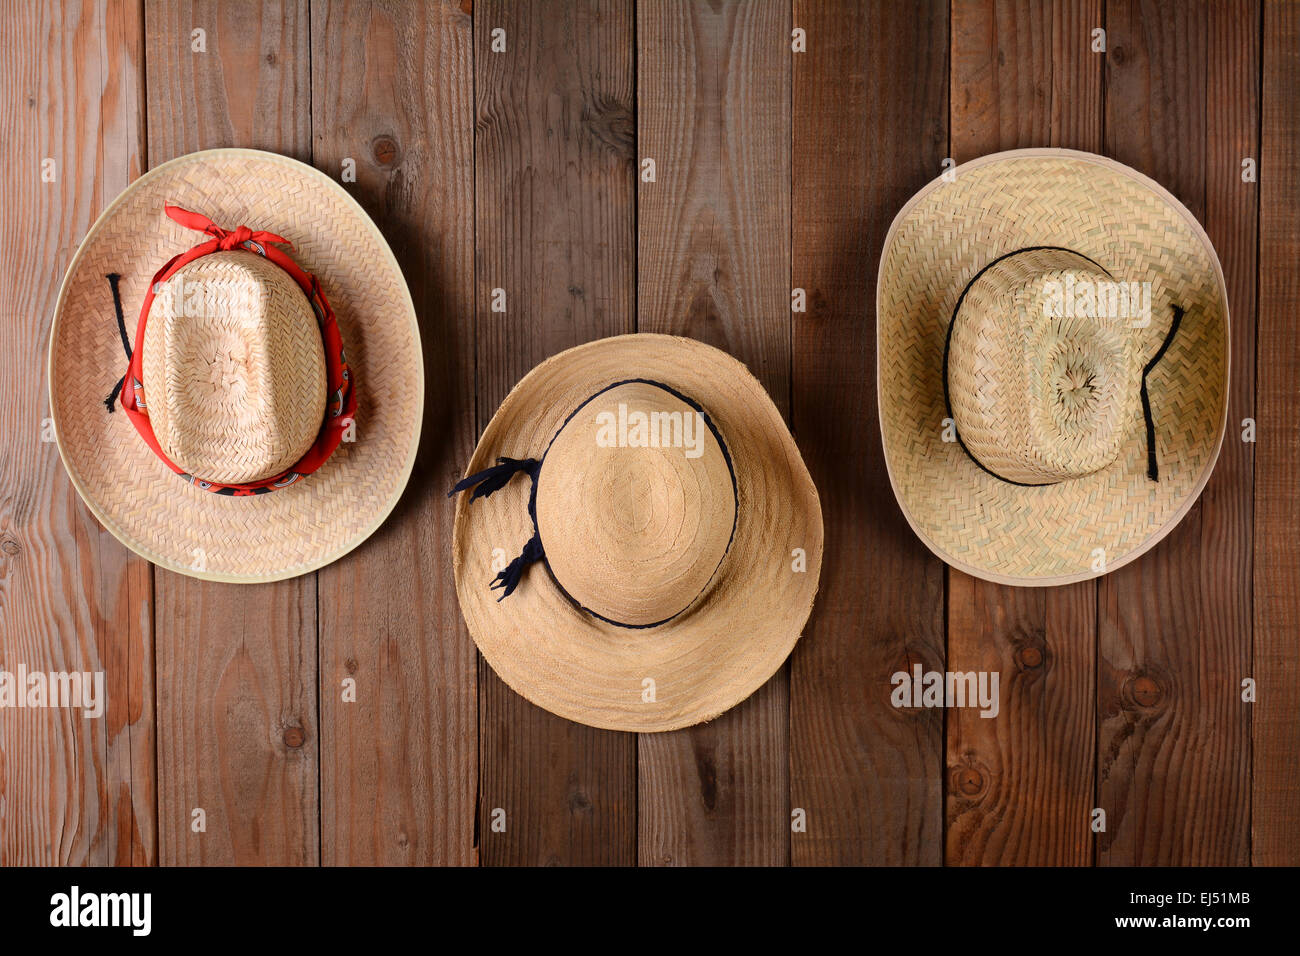 Three straw hats hanging on a rustic wood farmhouse wall. Closeup in horizontal format. Stock Photo